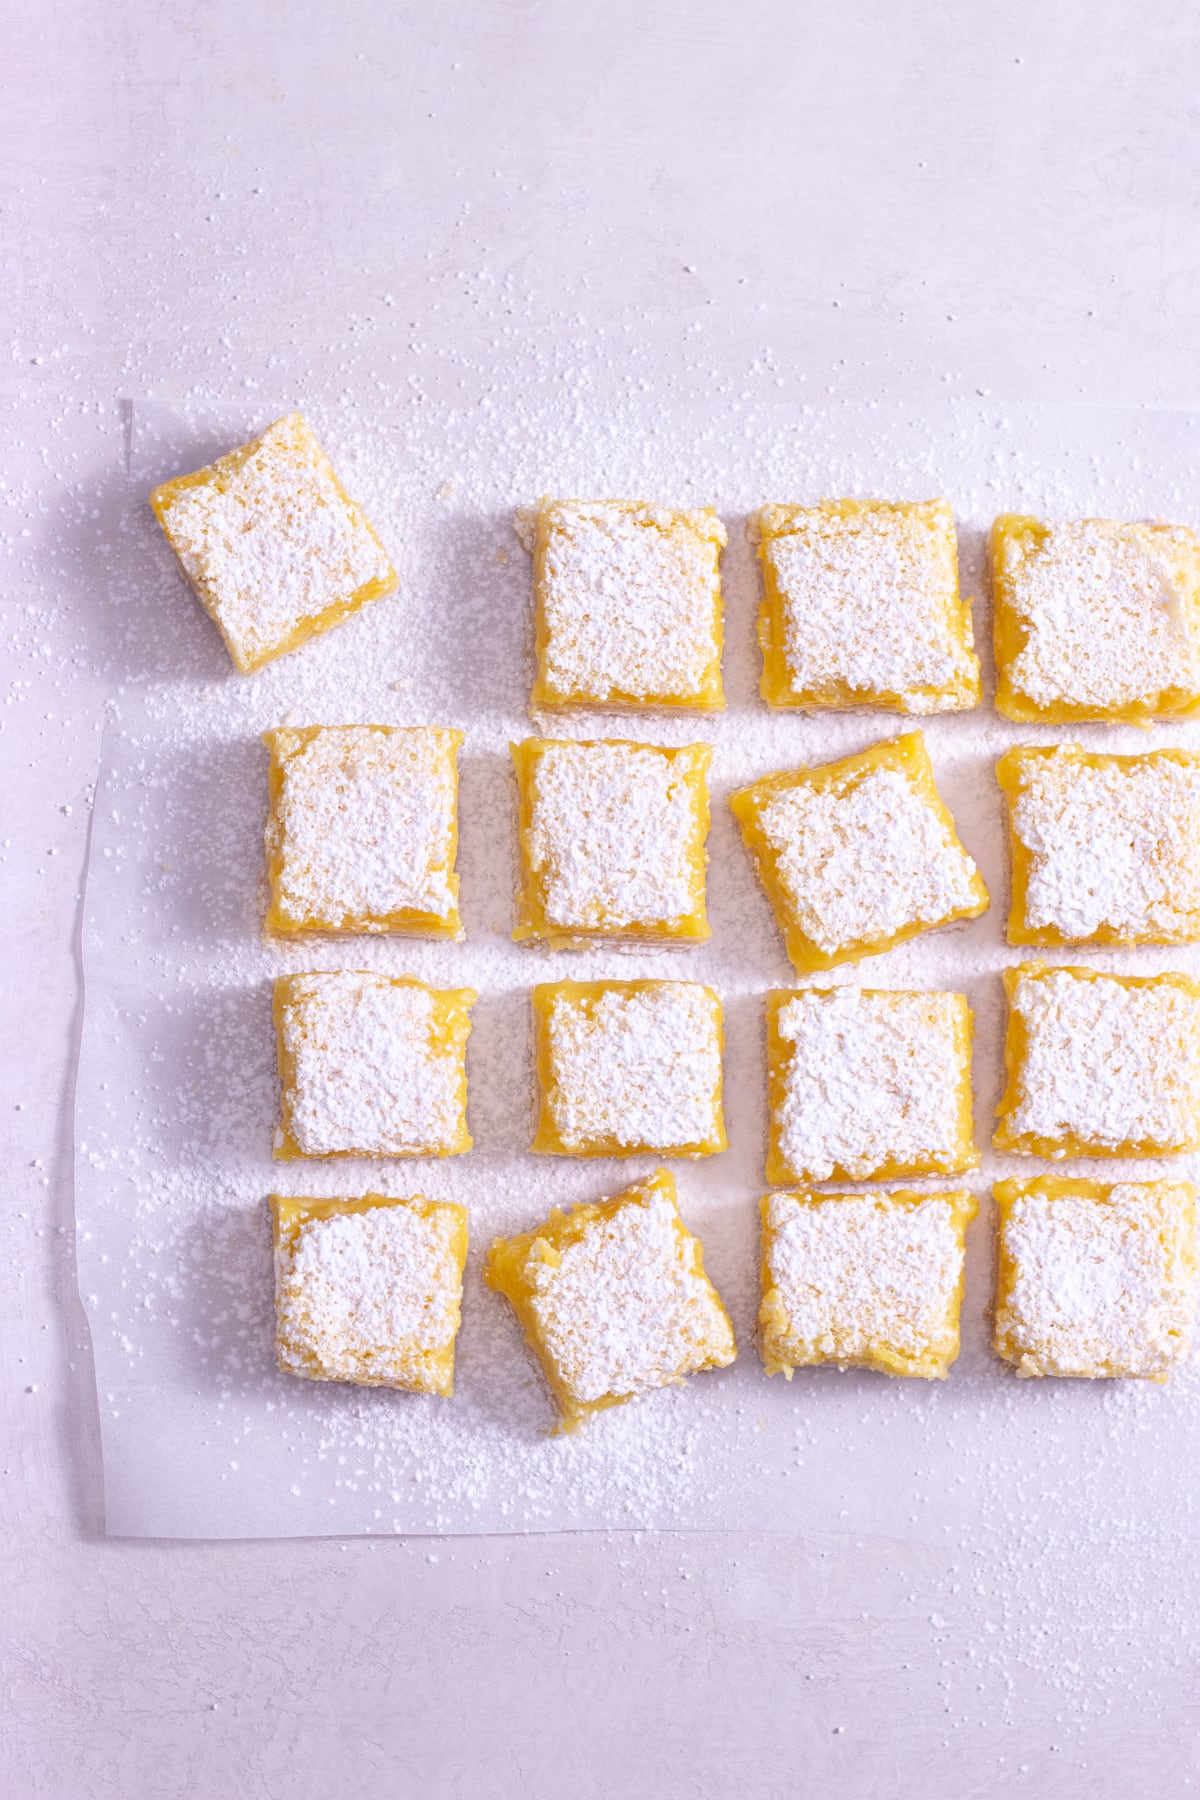 Overhead view of lemon squares on parchment on a light surface.